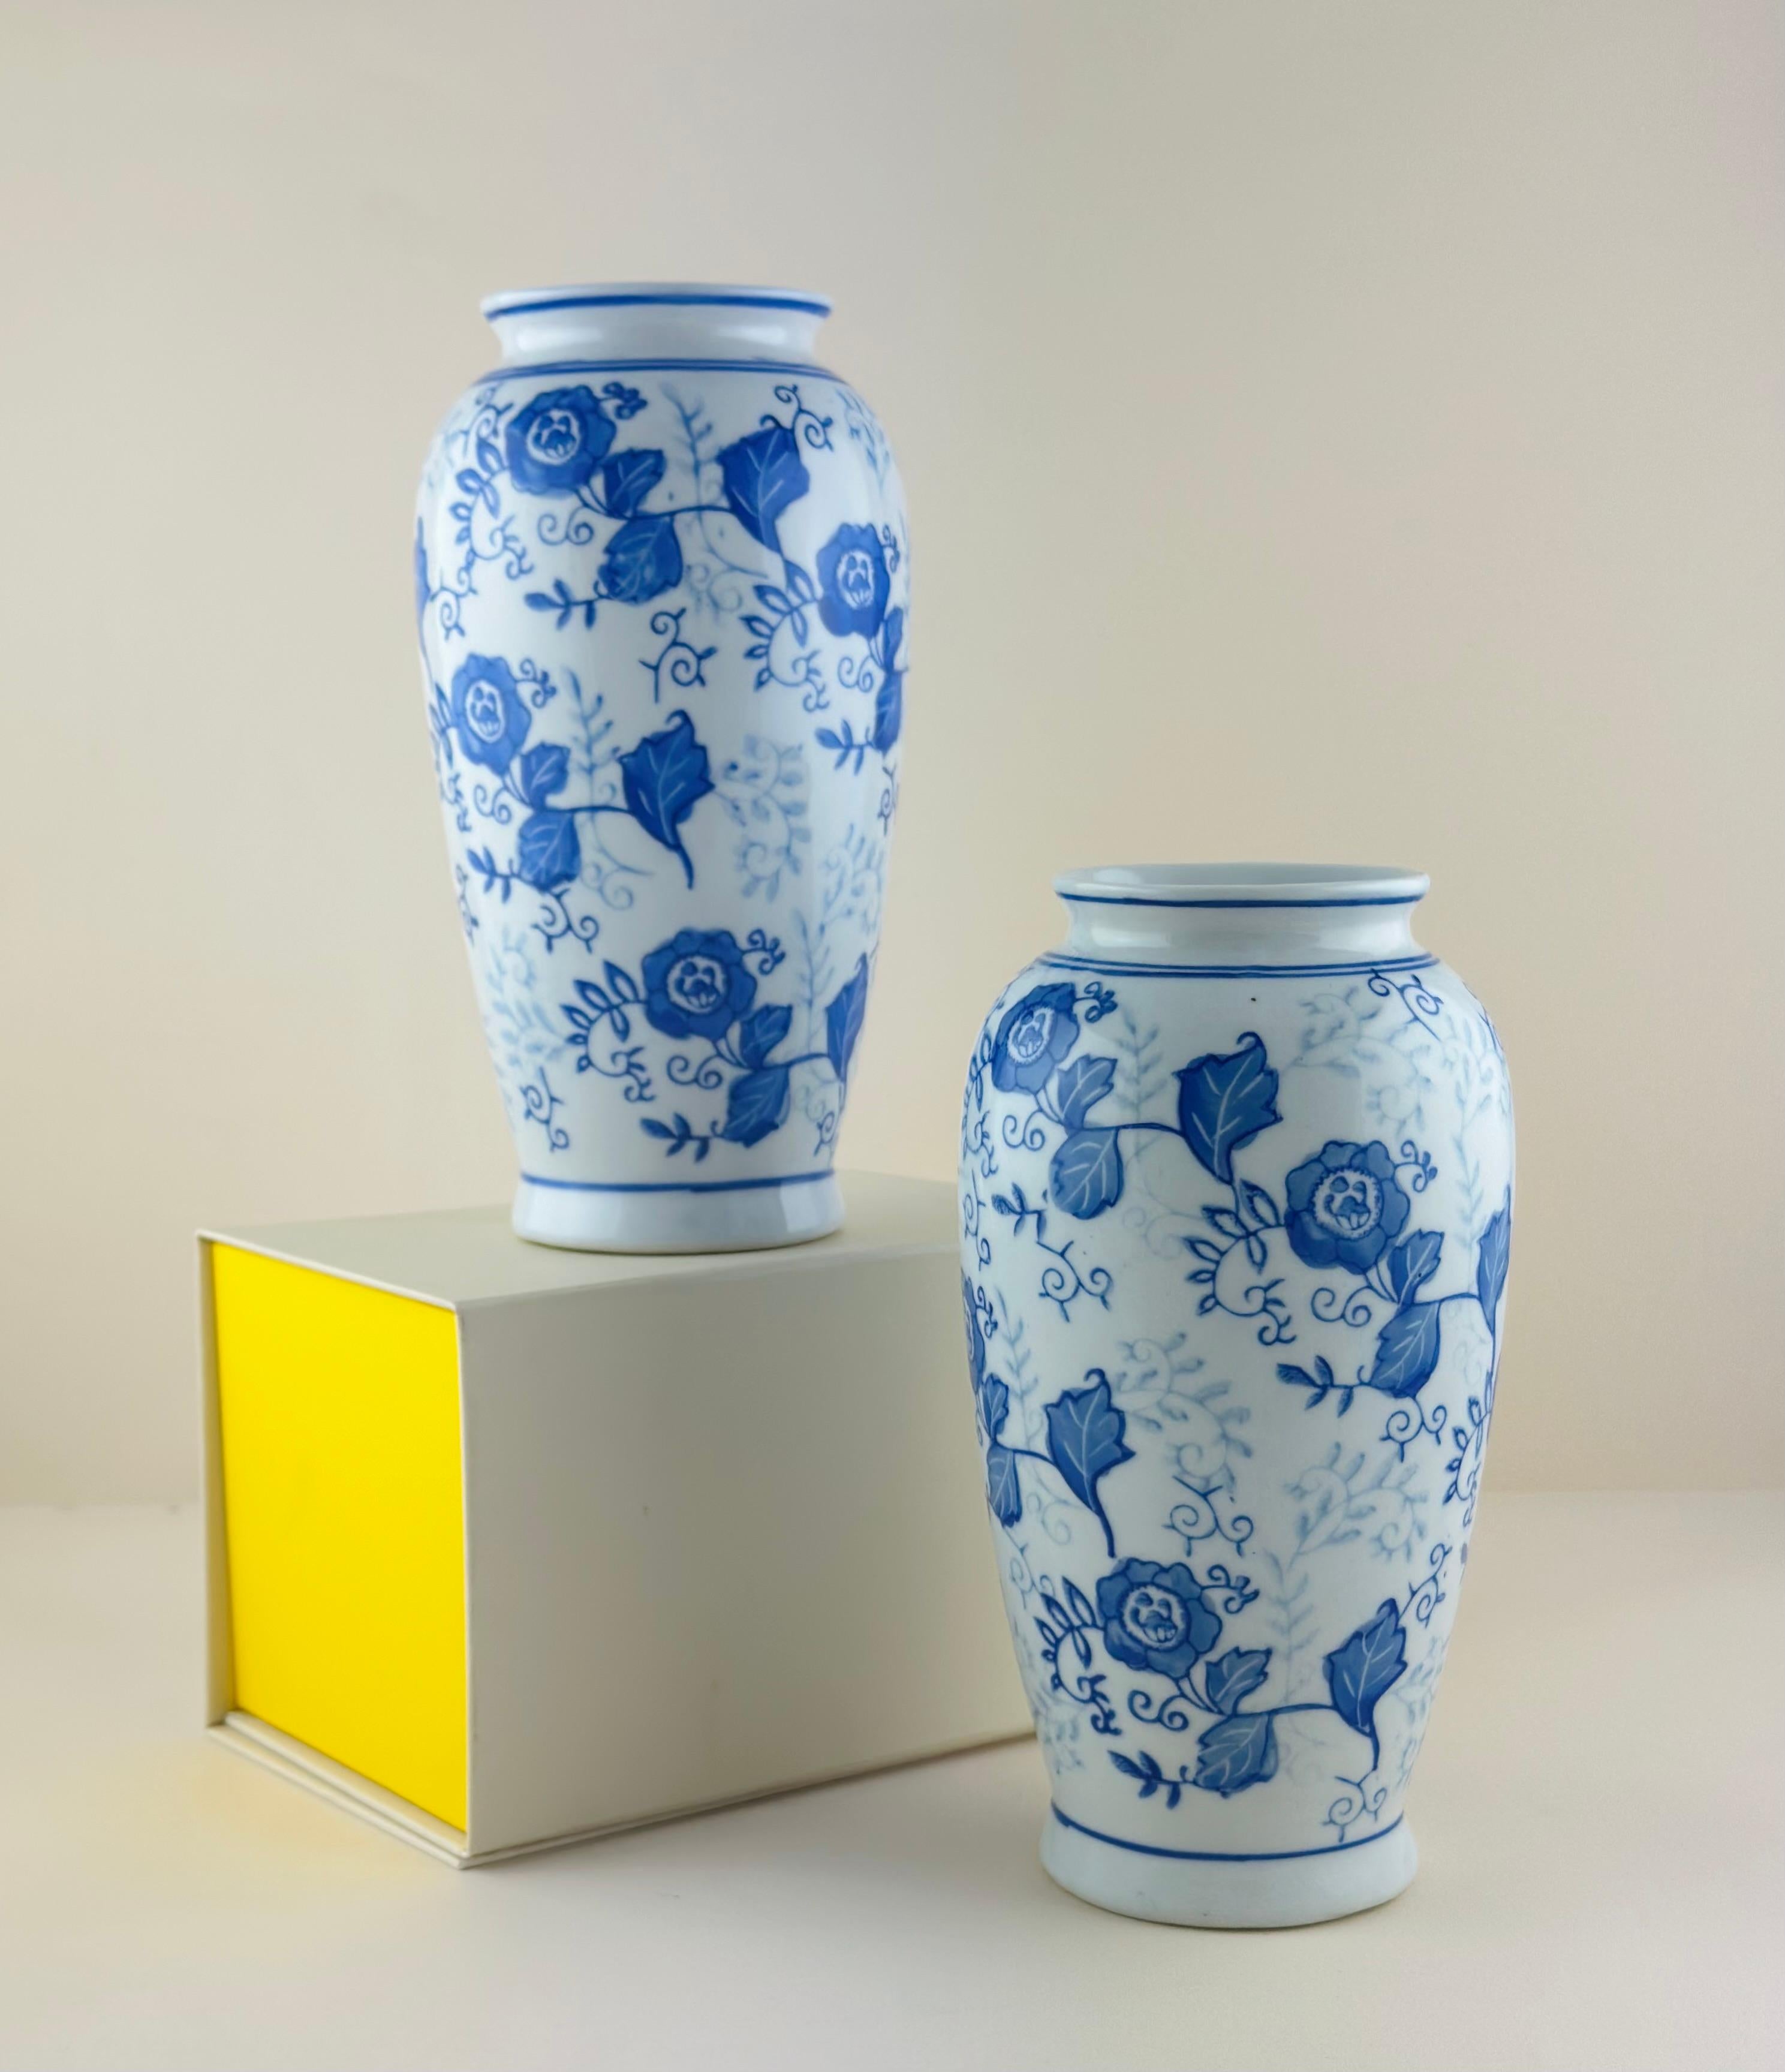 Pair of vintage 'Ming style' vases, crafted in China around the late 1980s.

Delicately hand-painted and glazed with a Ming-style decoration: A trail of bold cobalt blue flowers and delicate foliage, covers the body of these ''Hu'-shaped vases. The